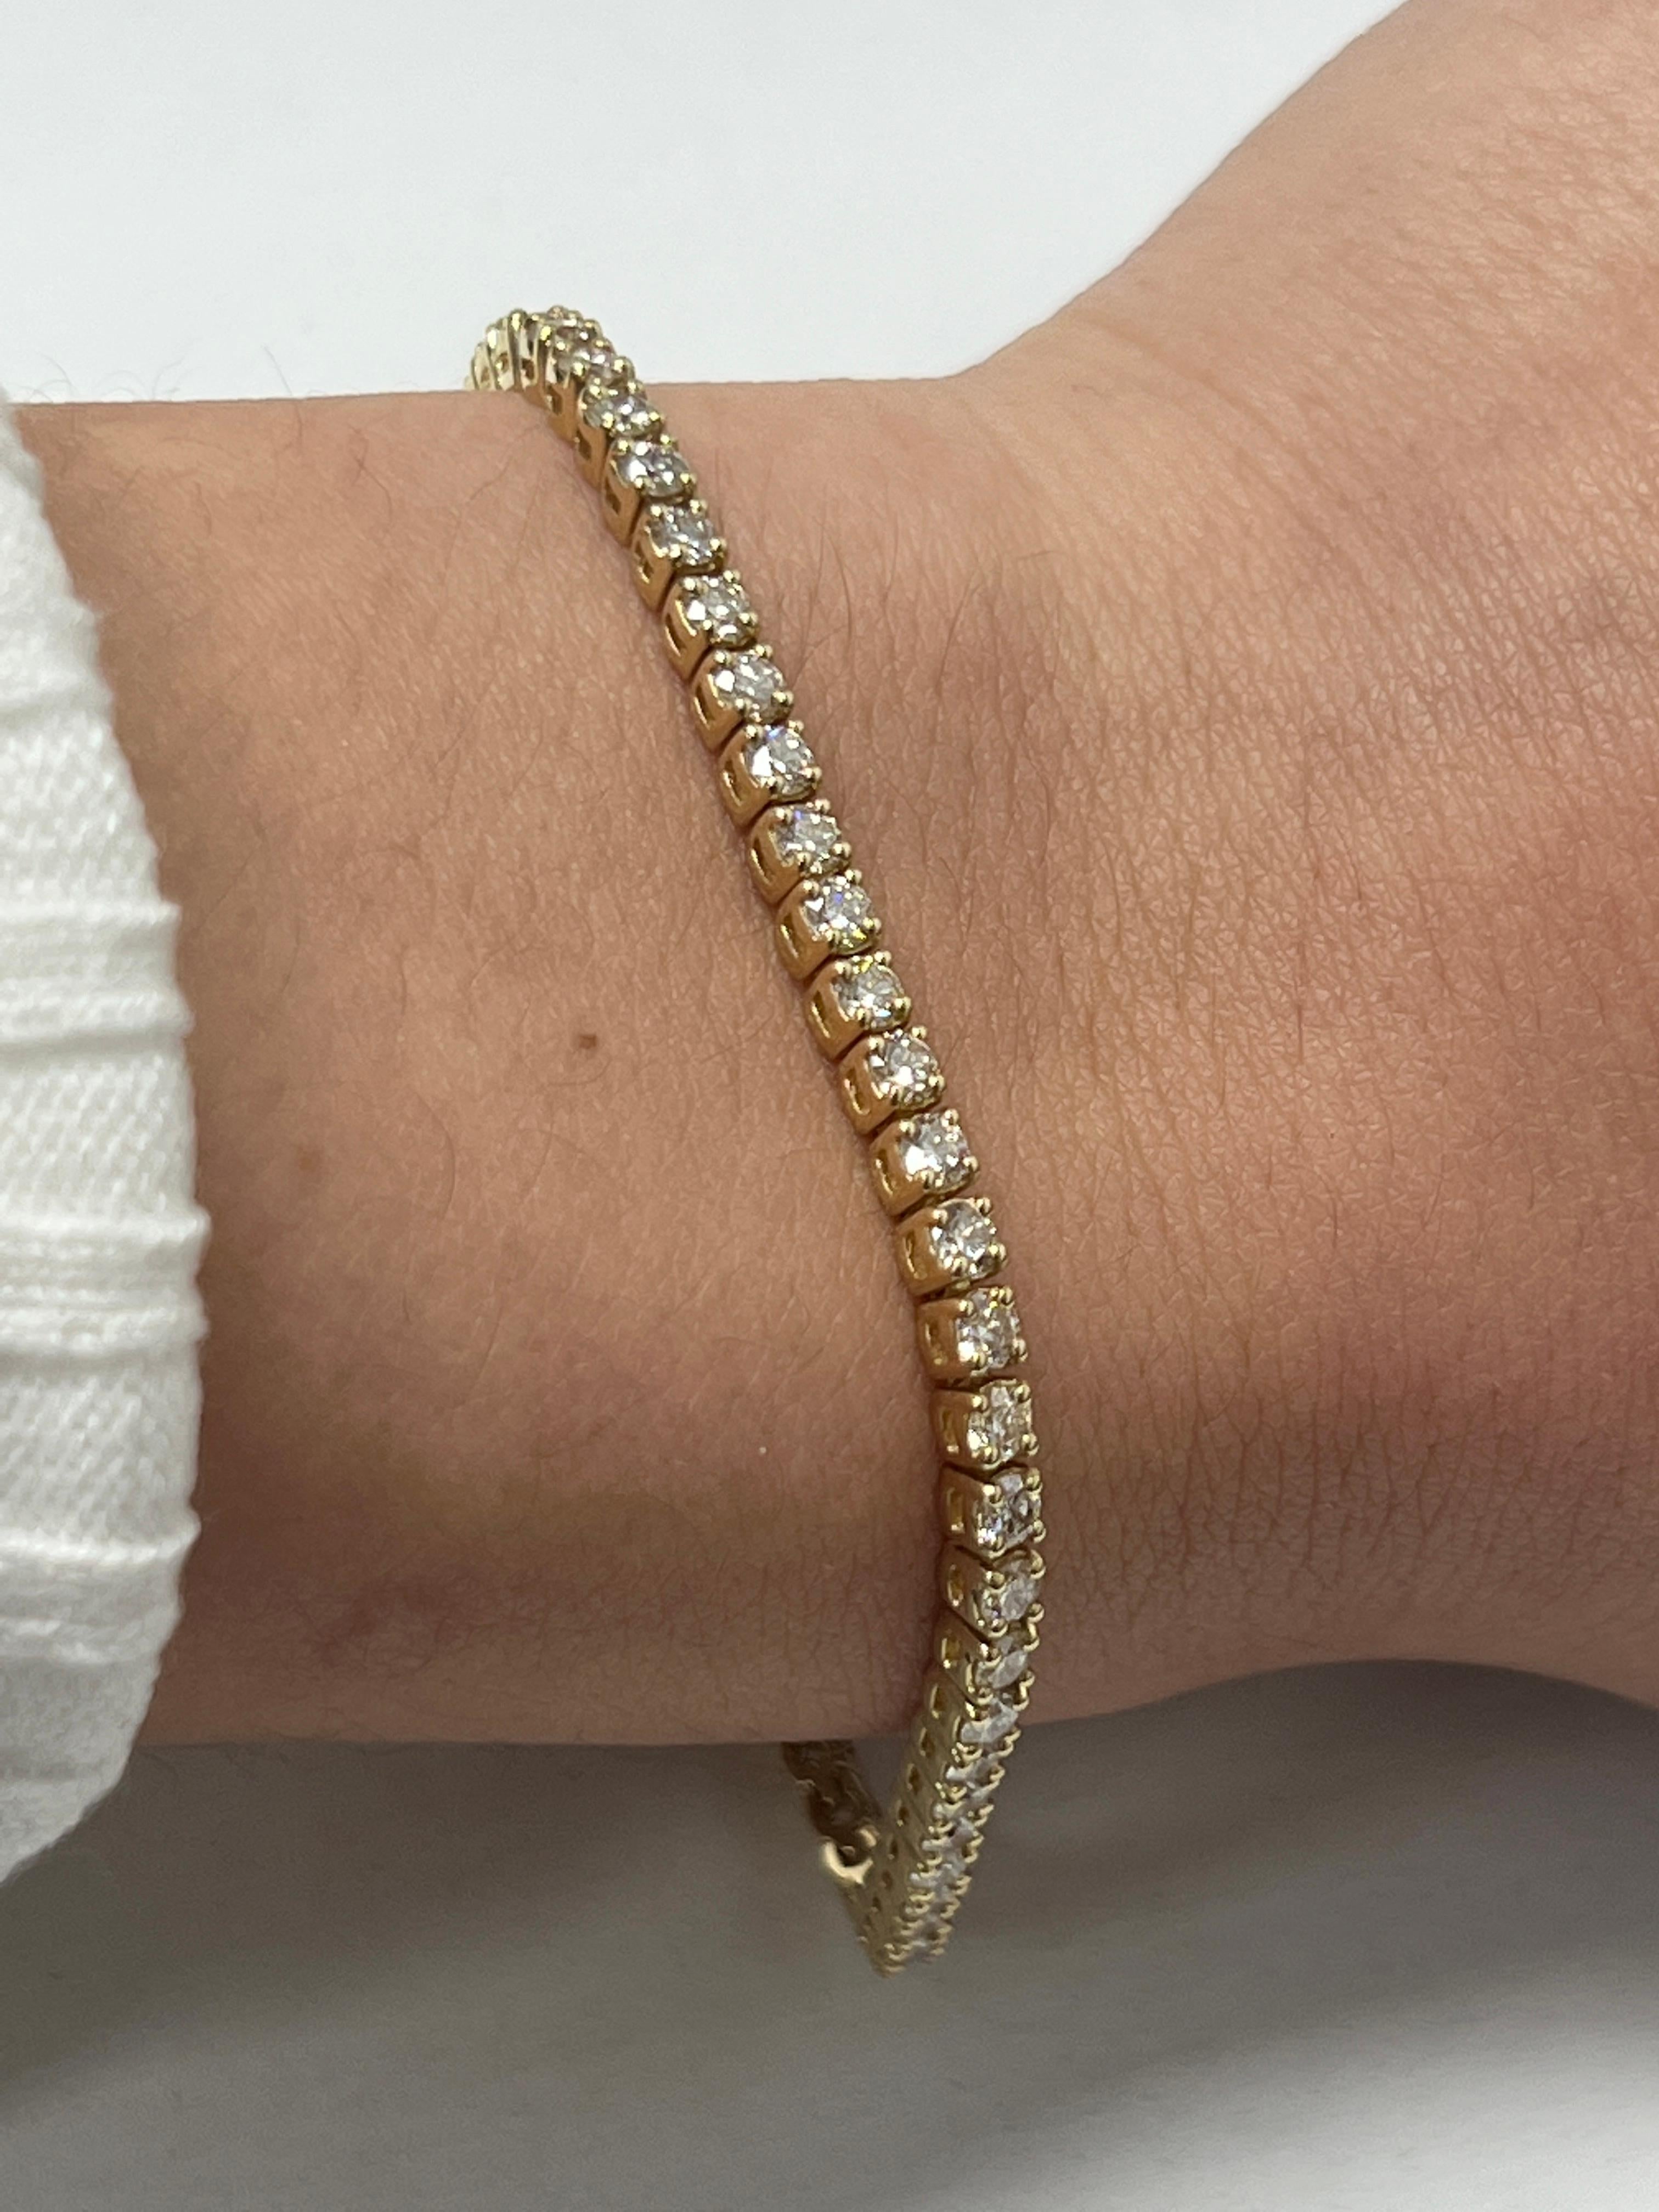 Fashion and glam are at the forefront with this exquisite diamond bracelet. This 14-karat yellow gold diamond bracelet is made from 10.3 grams of gold. The top is adorned with one row of I-J color, VS/SI clarity diamonds. This bracelet carries 63